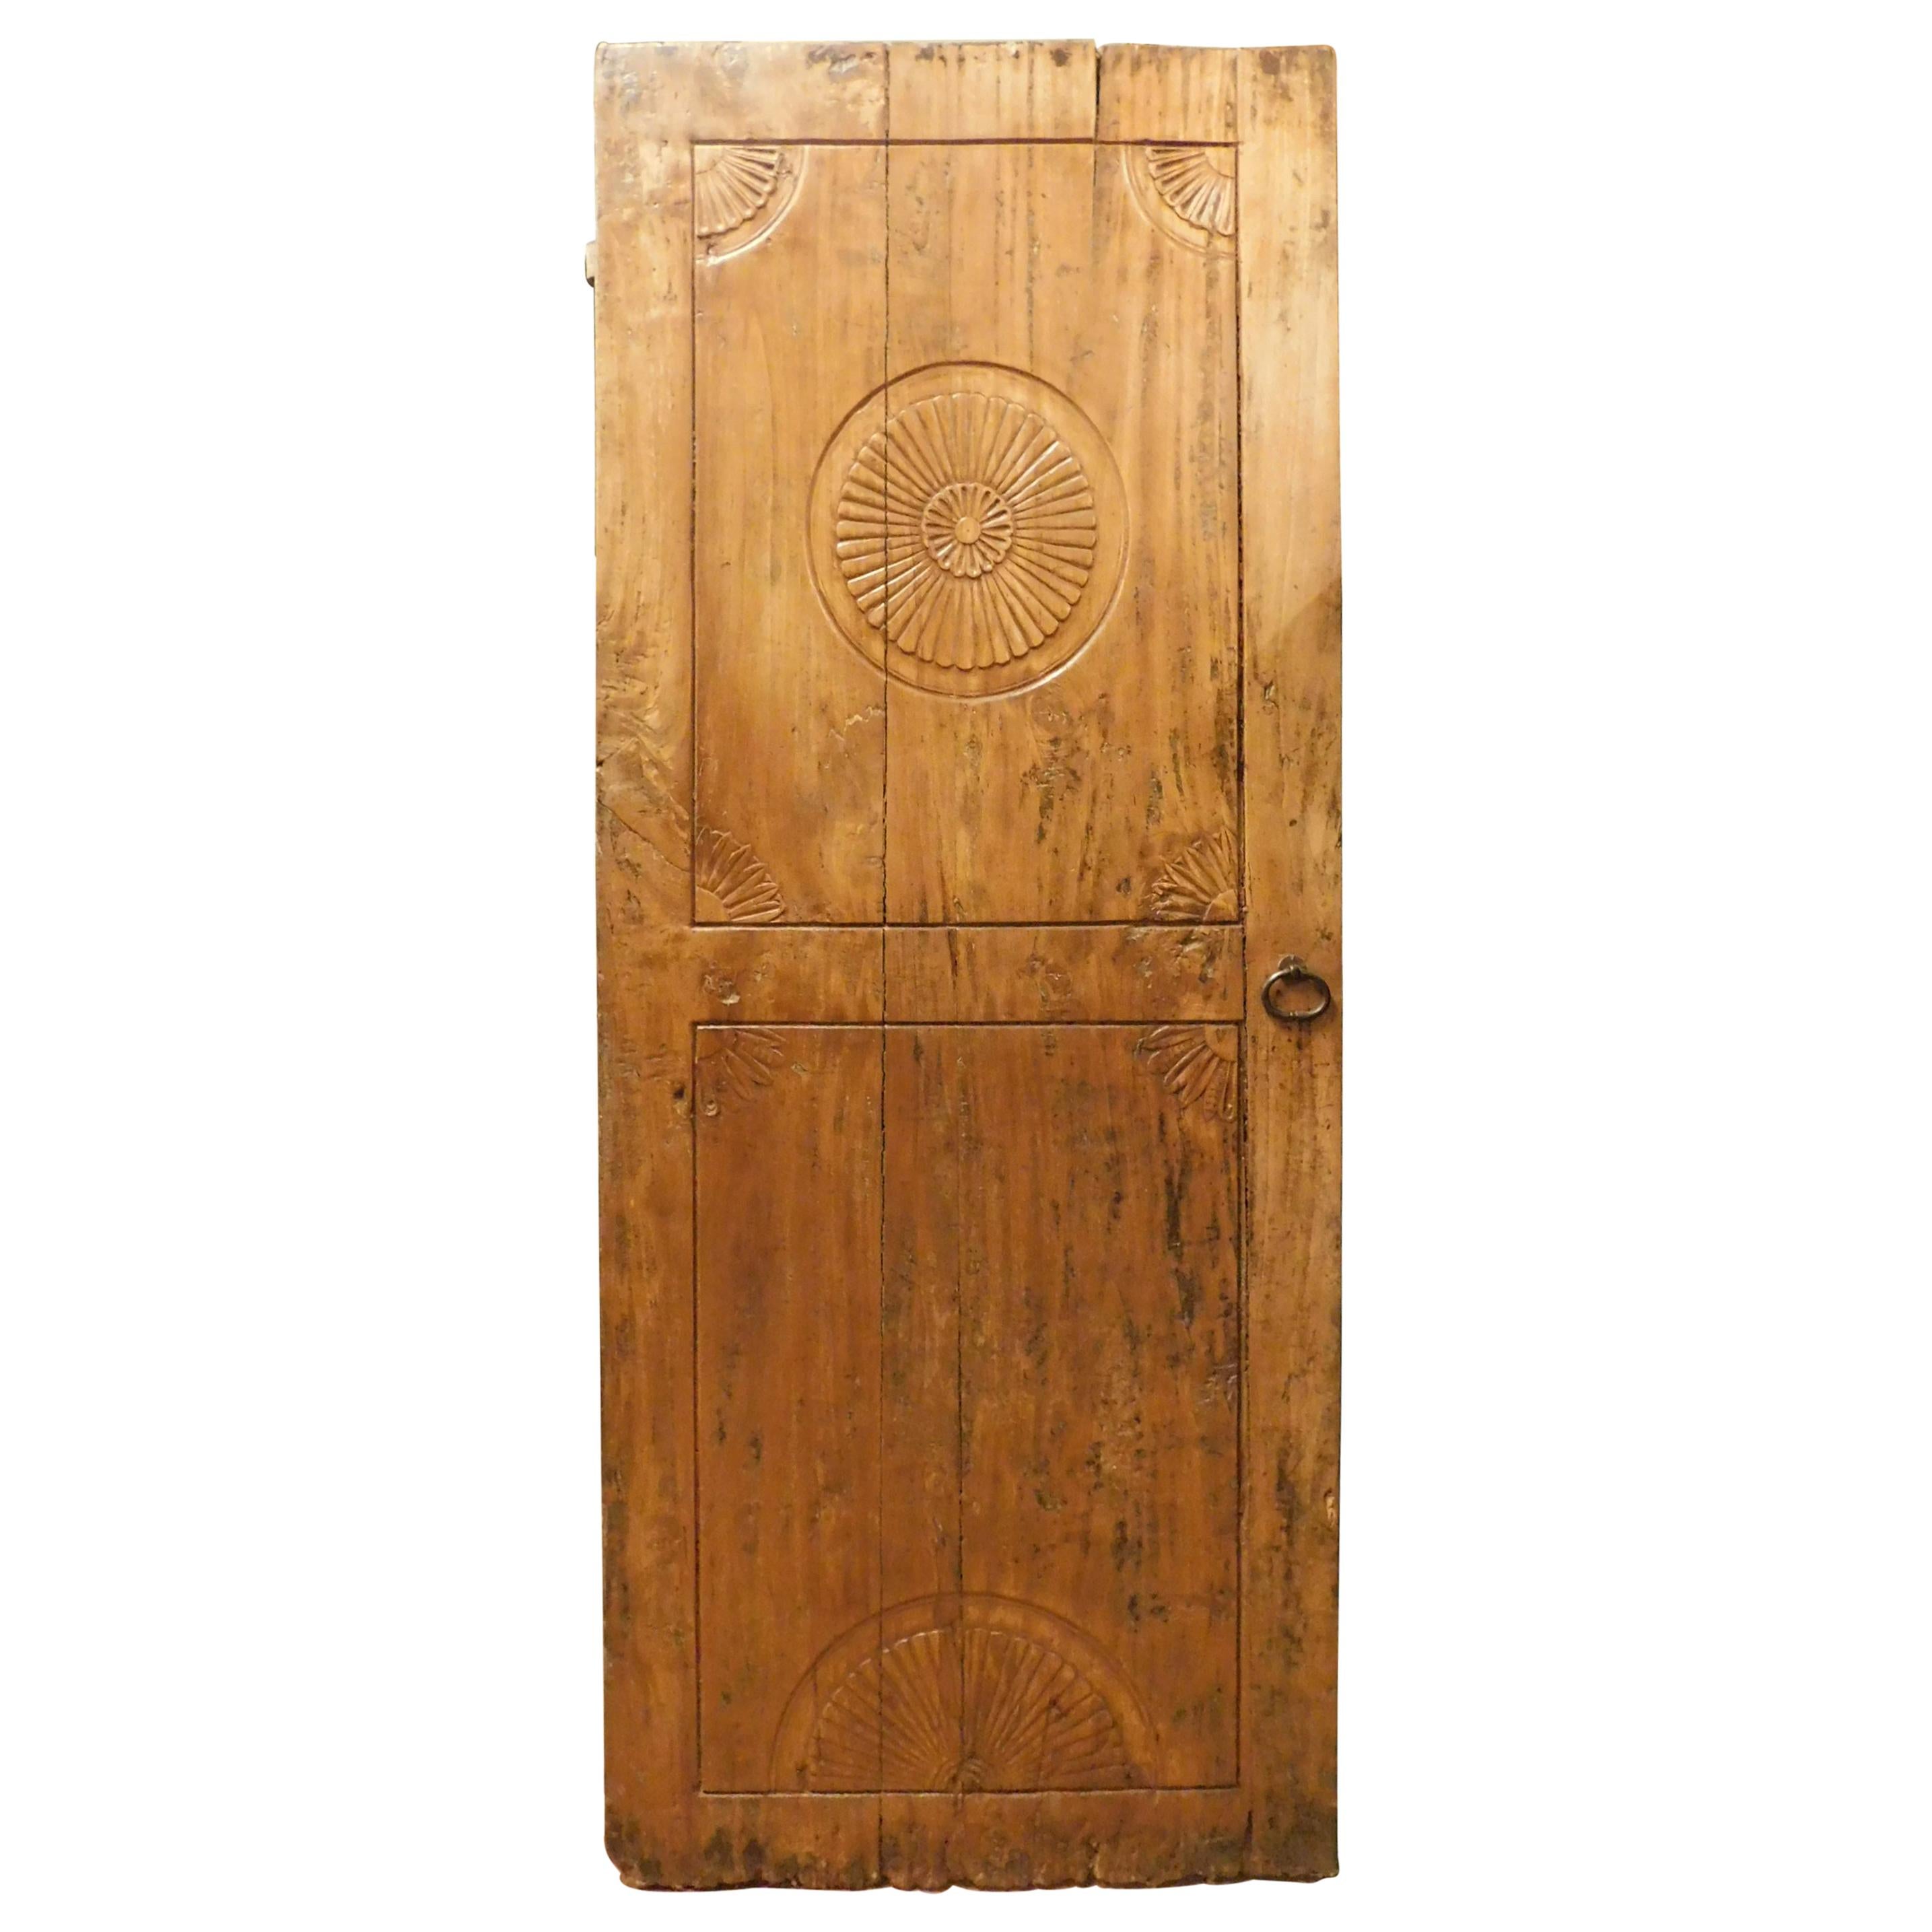 Antique Rustic Door in Poplar with Carved Flower Decorations, 19th Century Italy